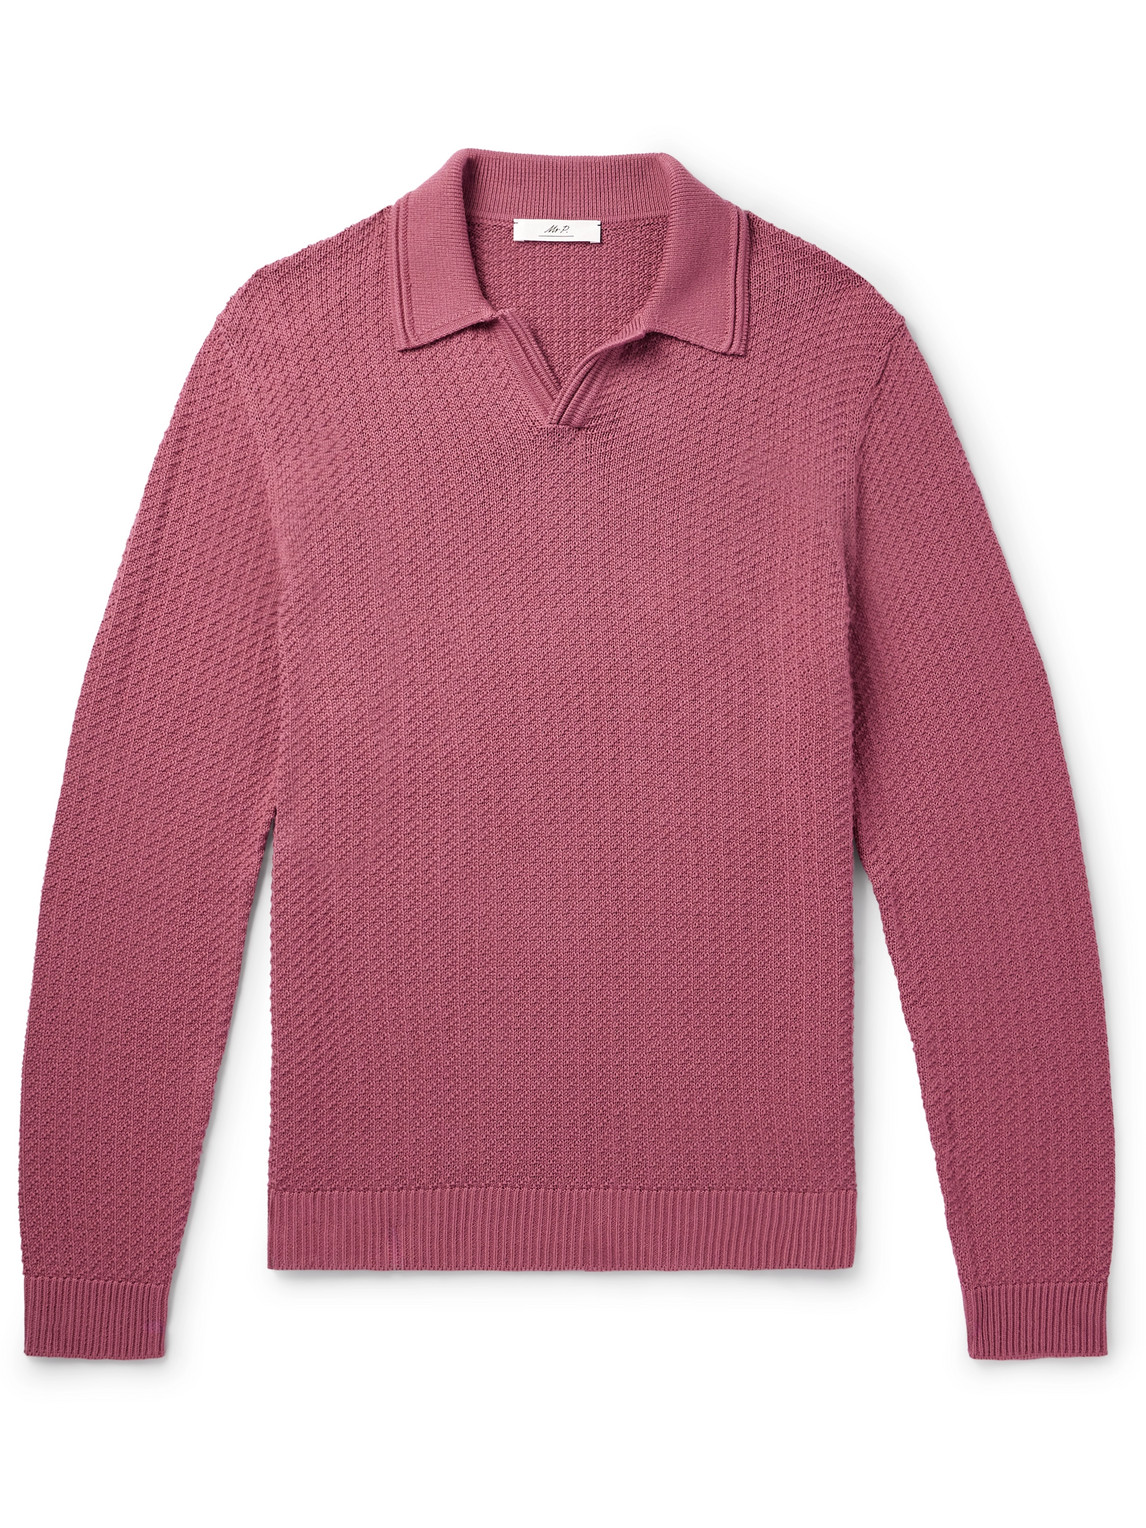 Mr P Textured Organic Cotton Polo Shirt In Pink